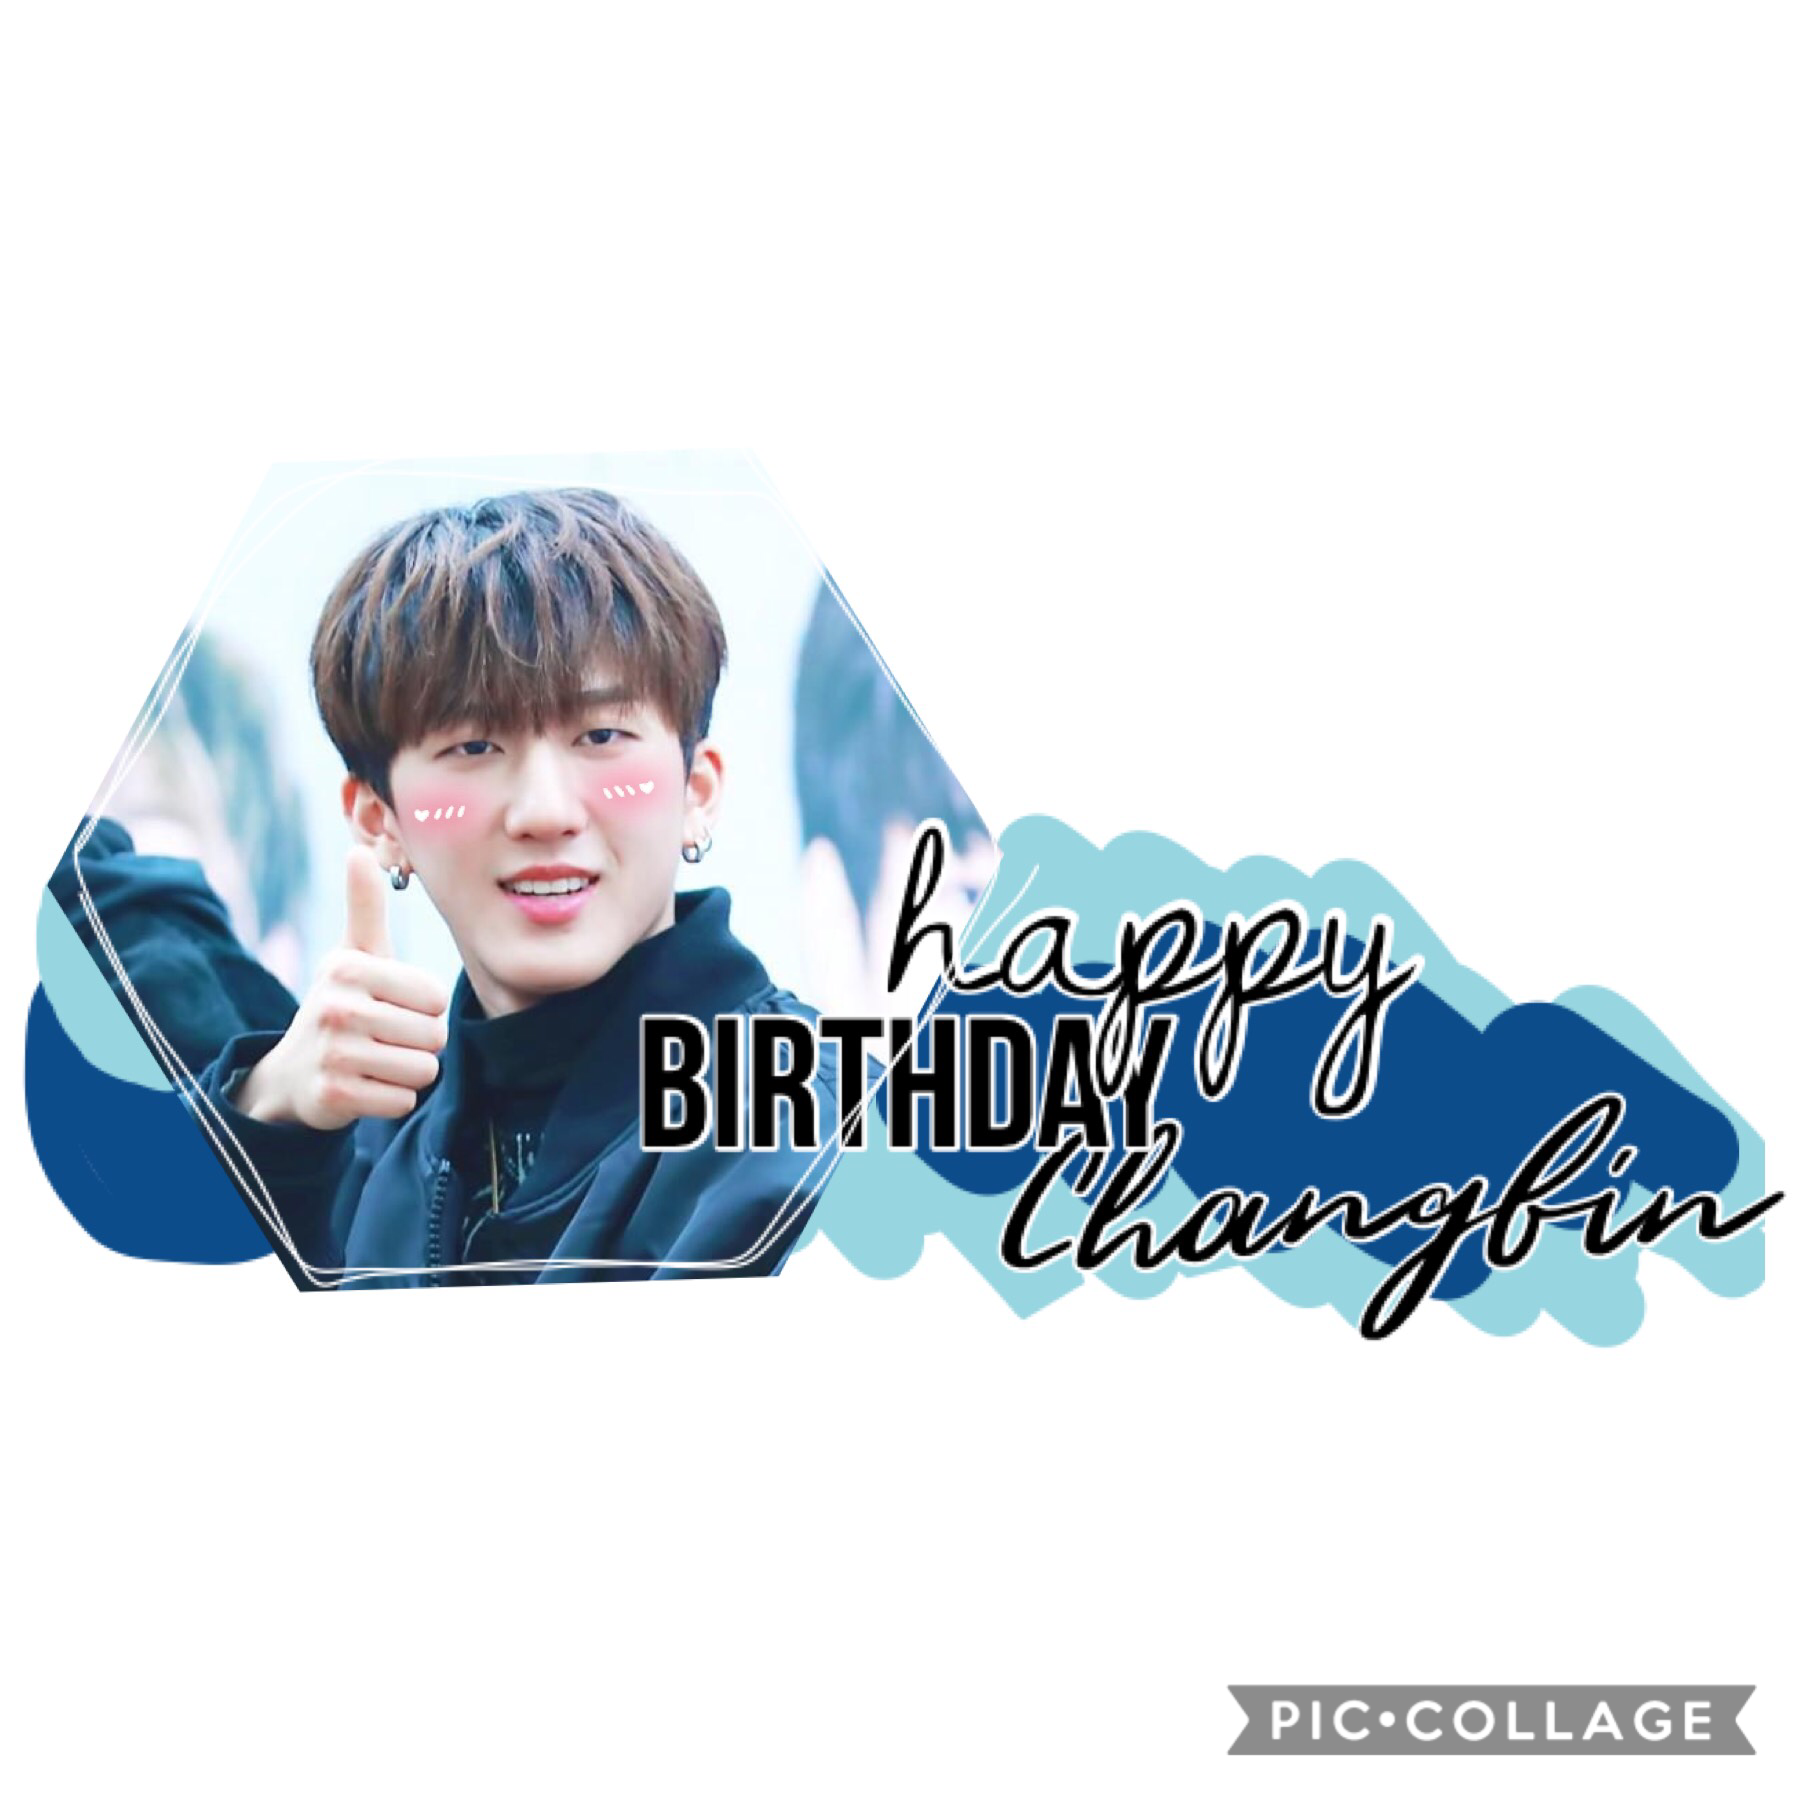 💙~tap~💙

HAPPY BRITHDAY CHANGBIN. We literally don’t deserve you. You are so sweet and kind. Hope you have an amazing day! Stay love u (I know he won’t read this but like whatever)